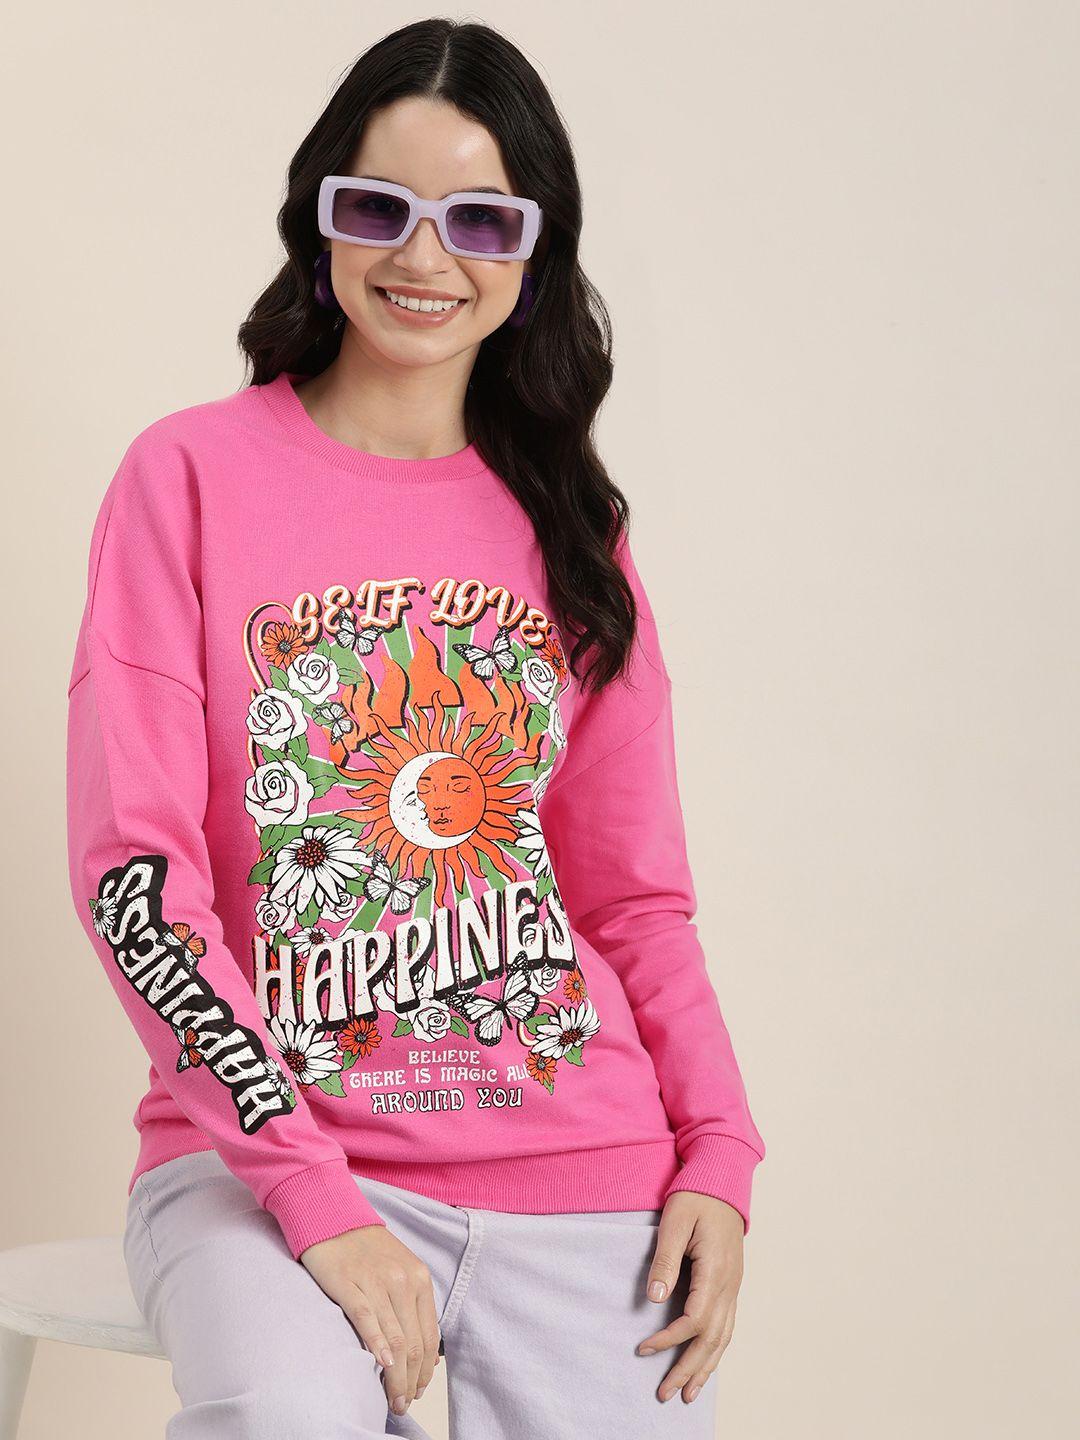 here&now graphic printed pure cotton sweatshirt